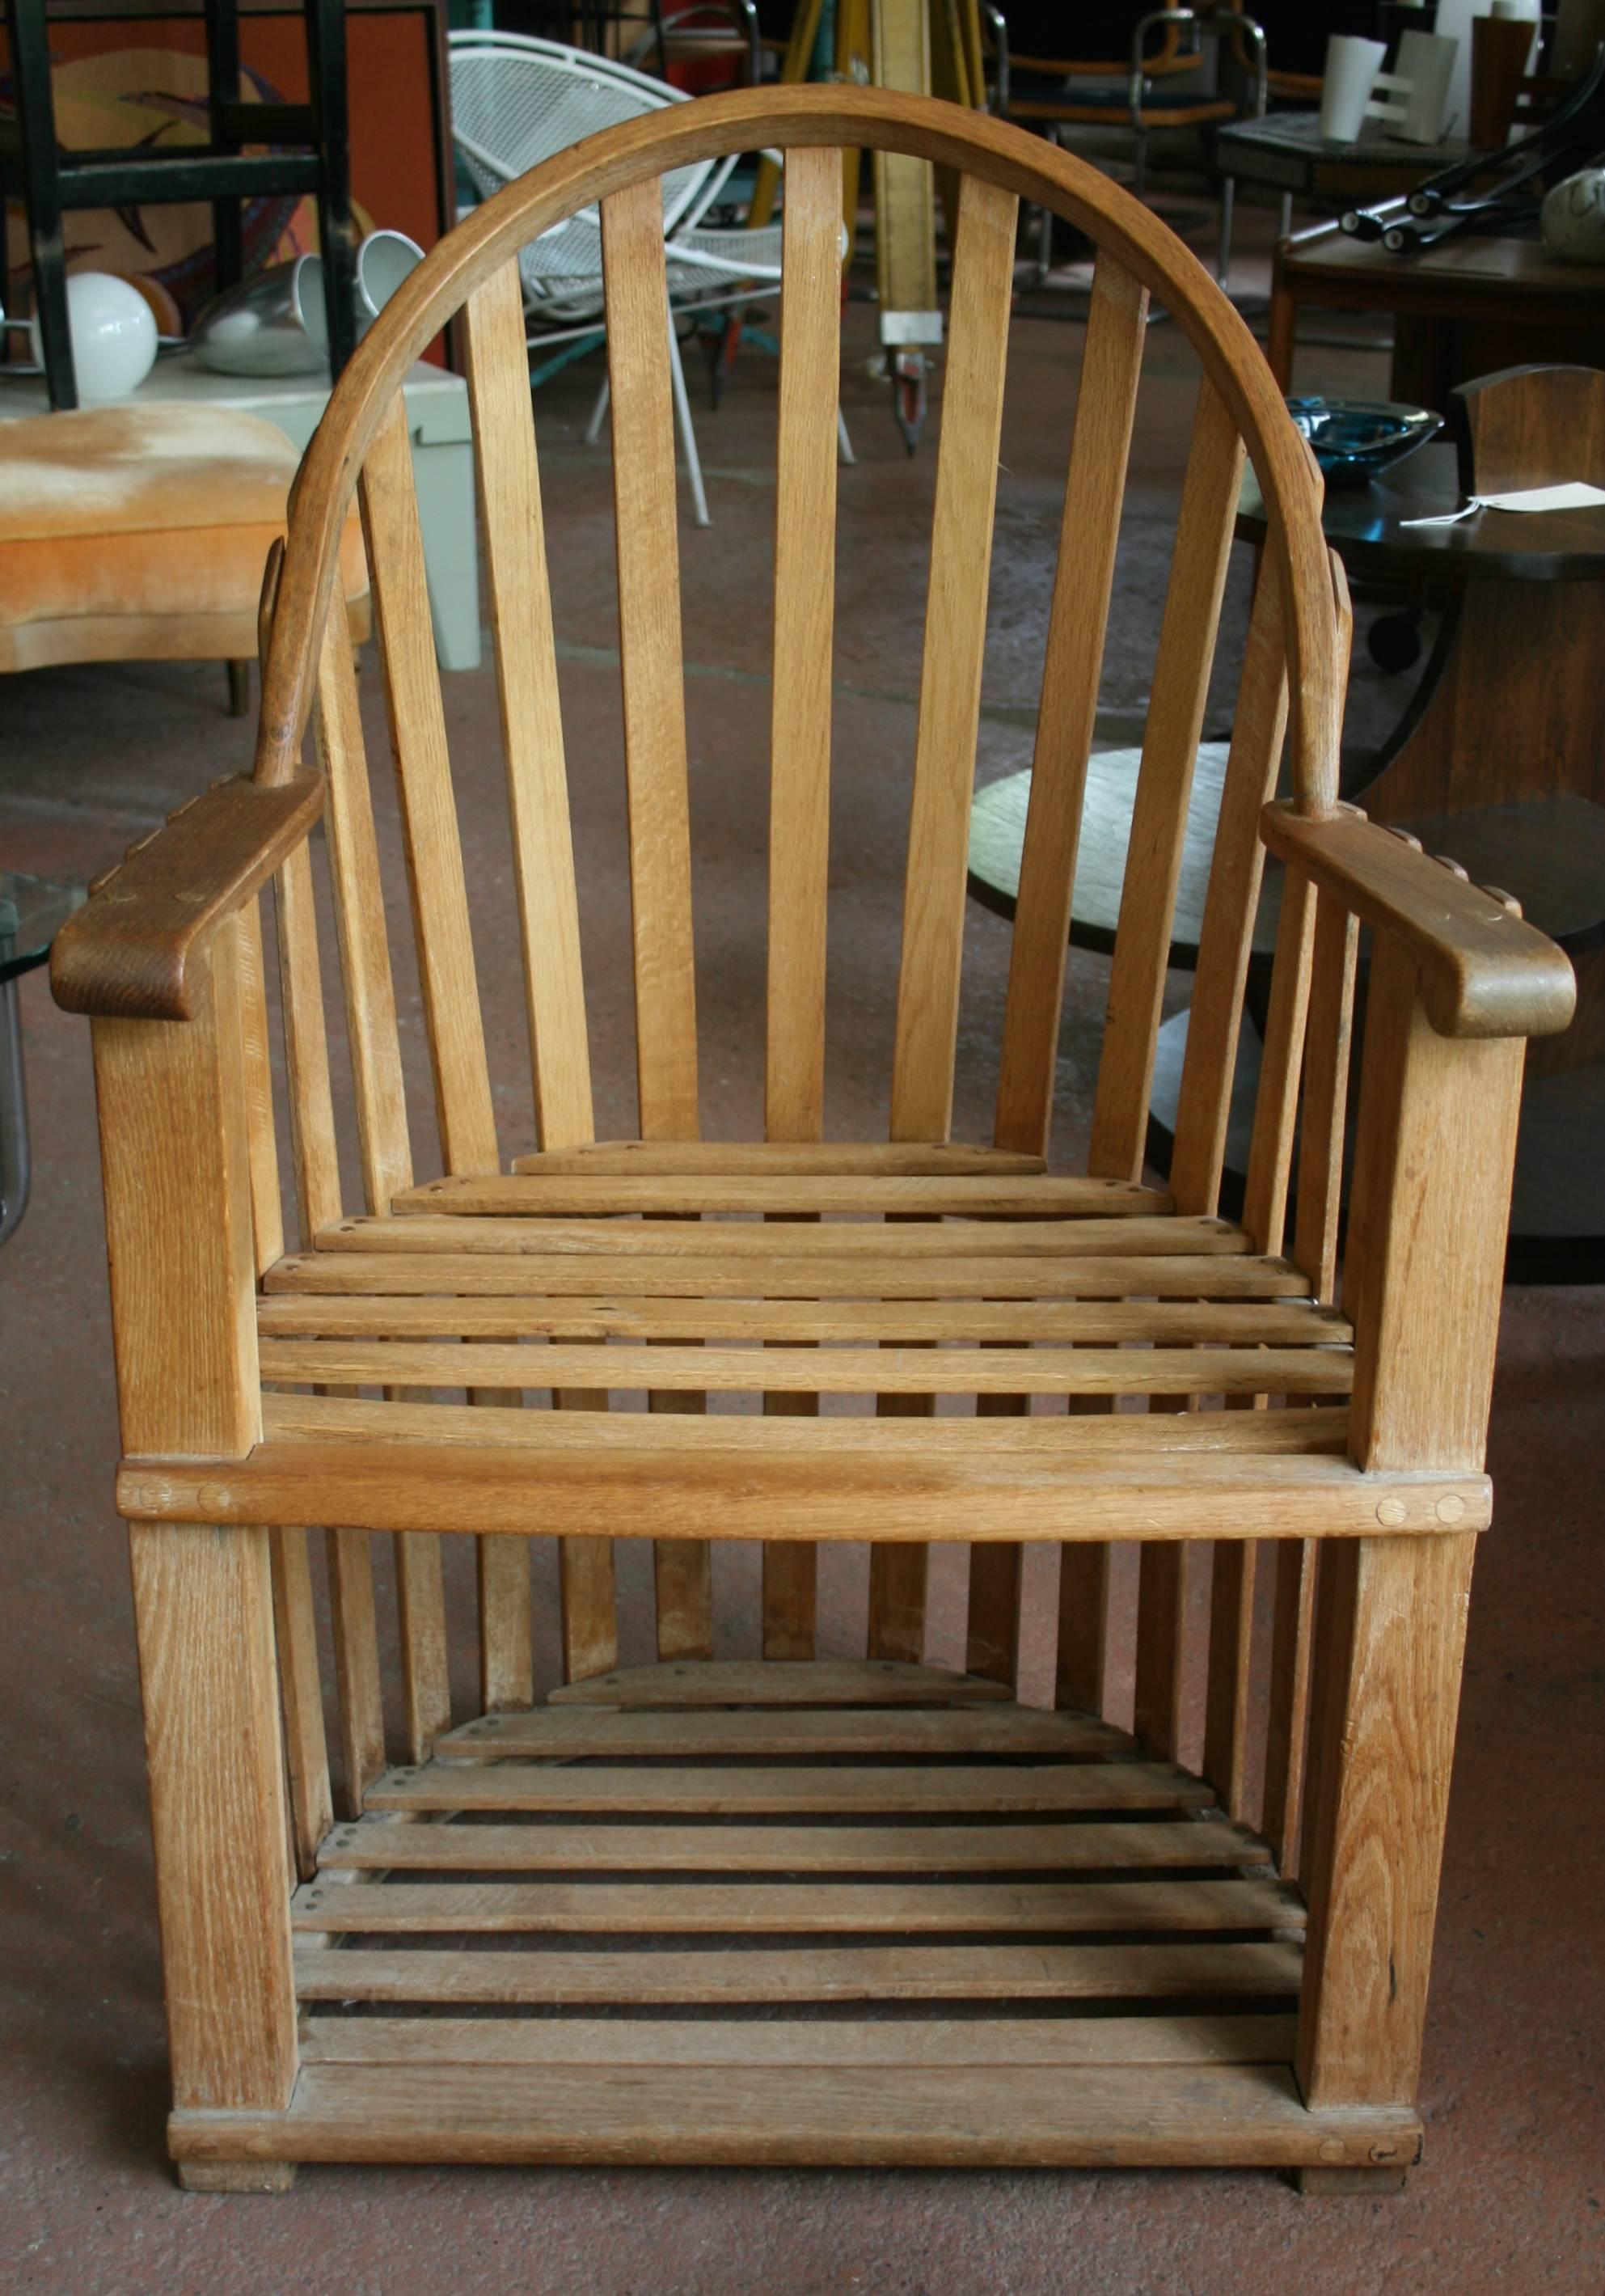 Mid-20th Century Slatted Wood Chair and Ottoman